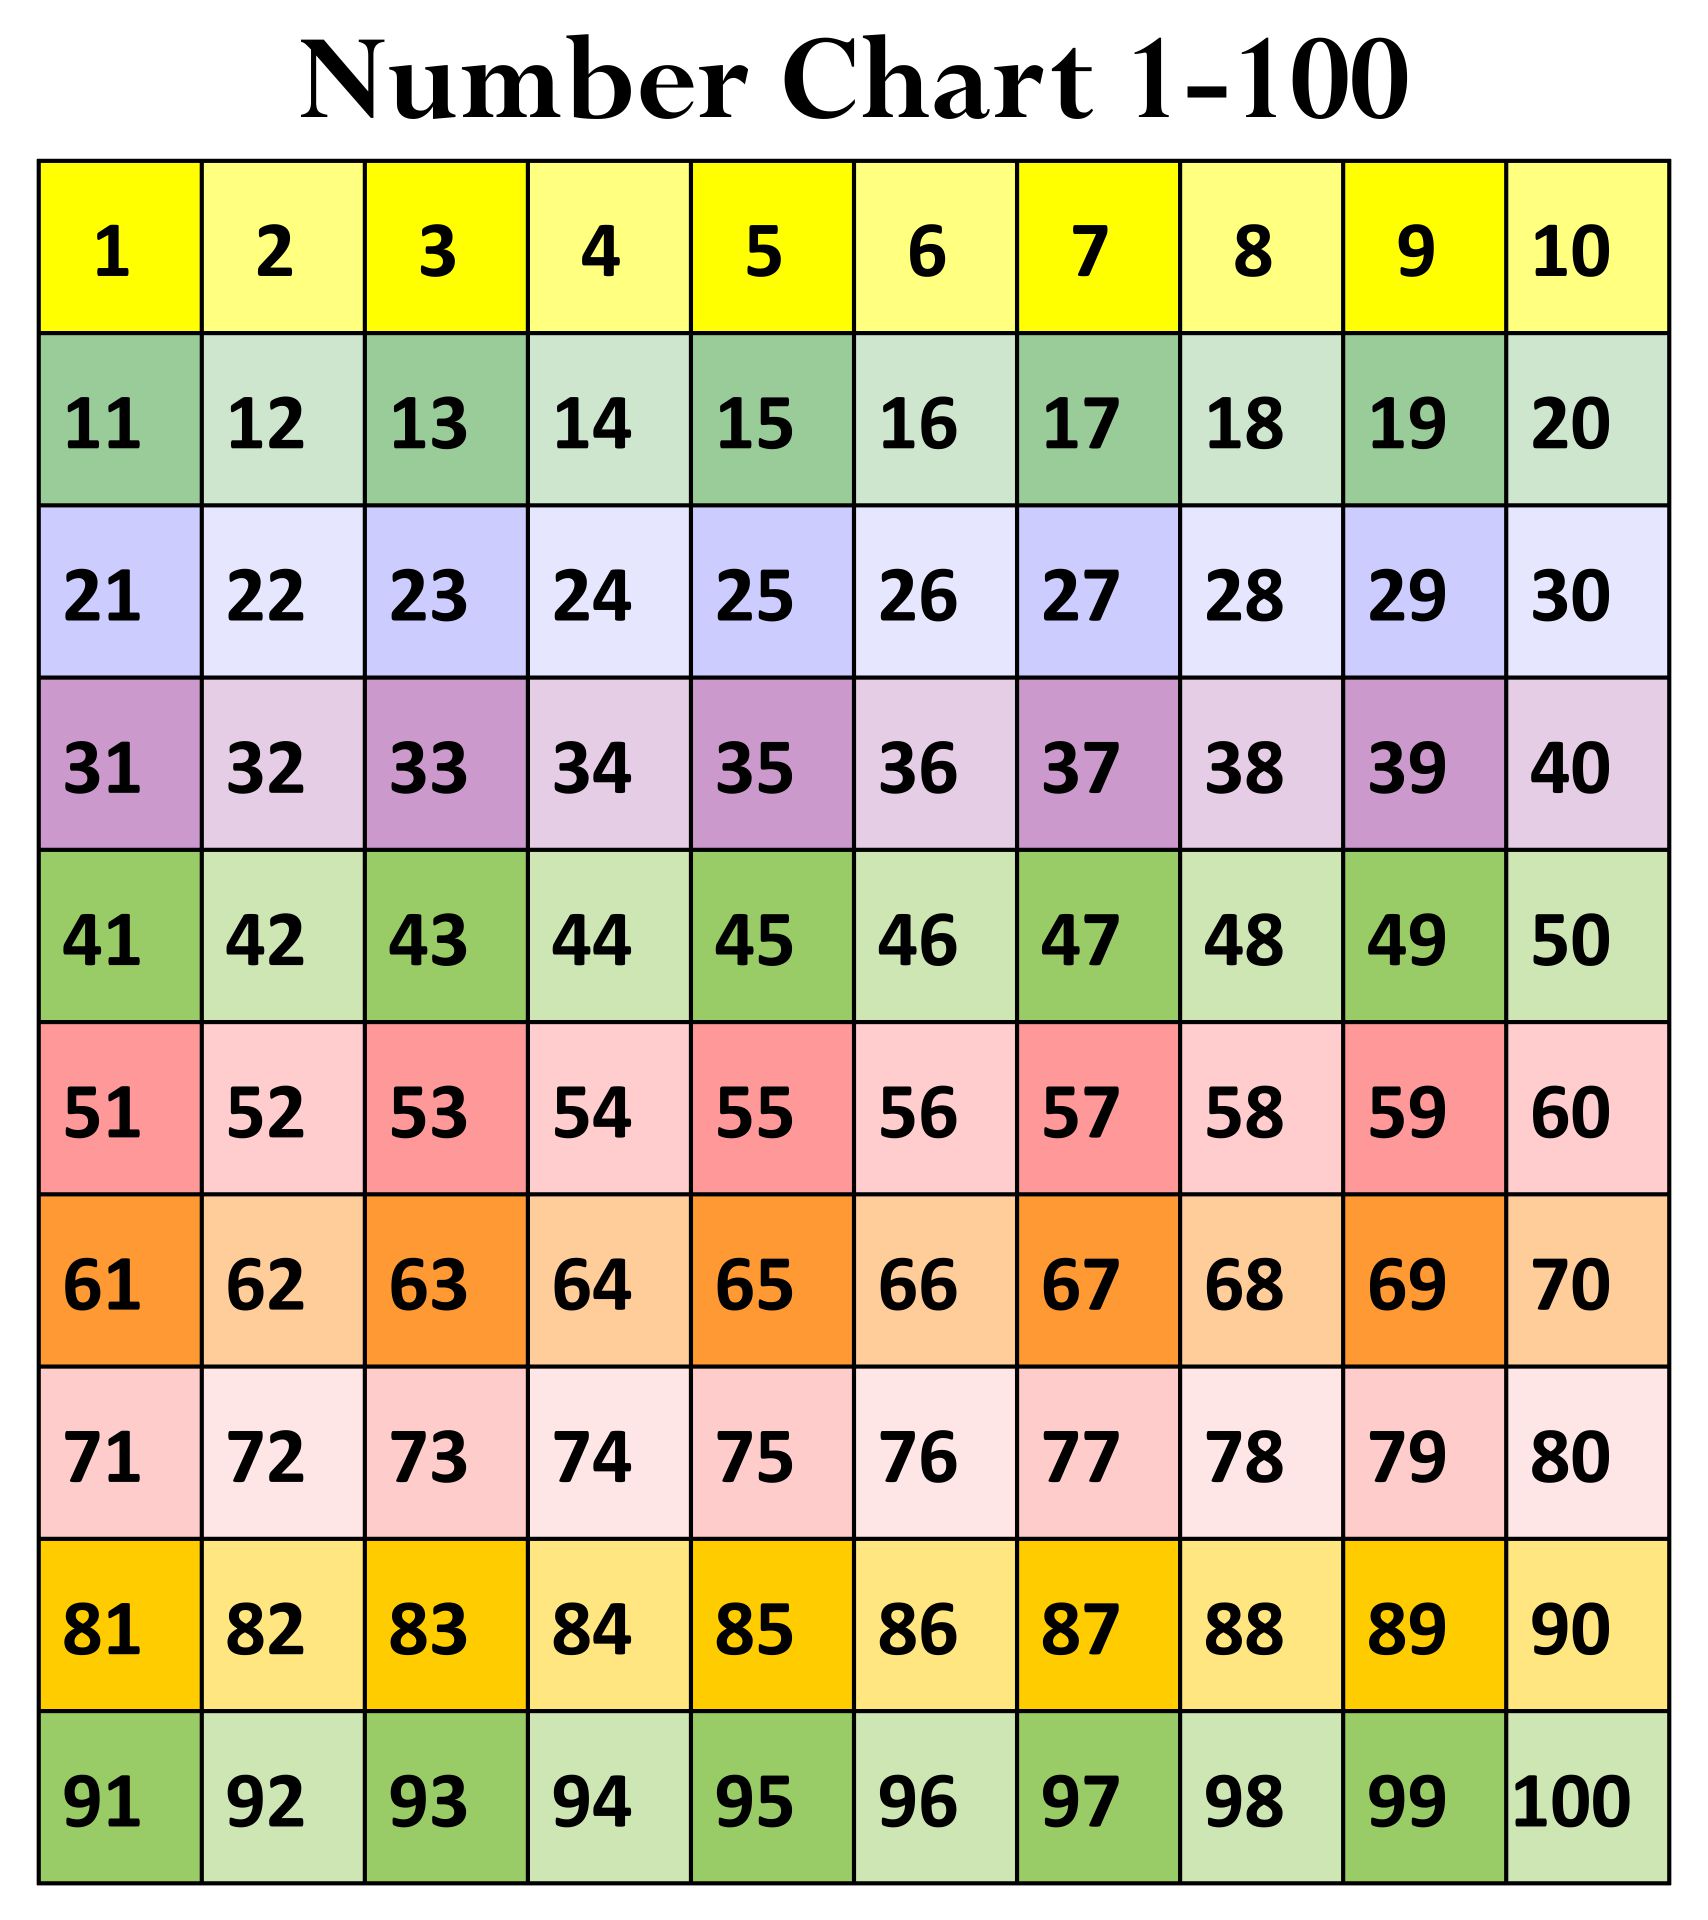 Number Chart (1 to 100) with Image (Printable and